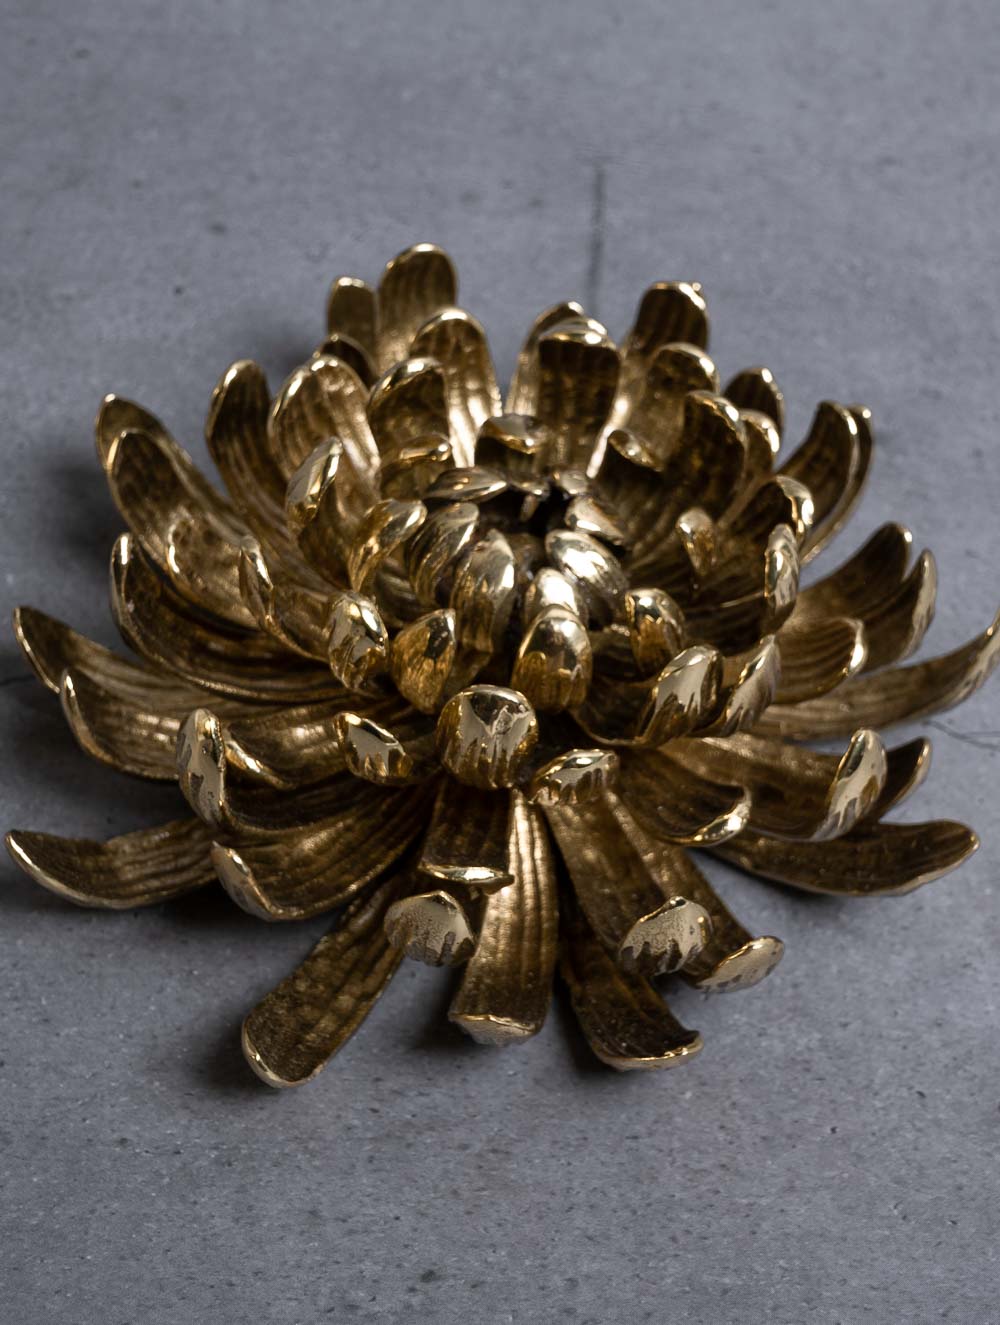 Load image into Gallery viewer, Exclusive Brass Curio - Chrysanthemum